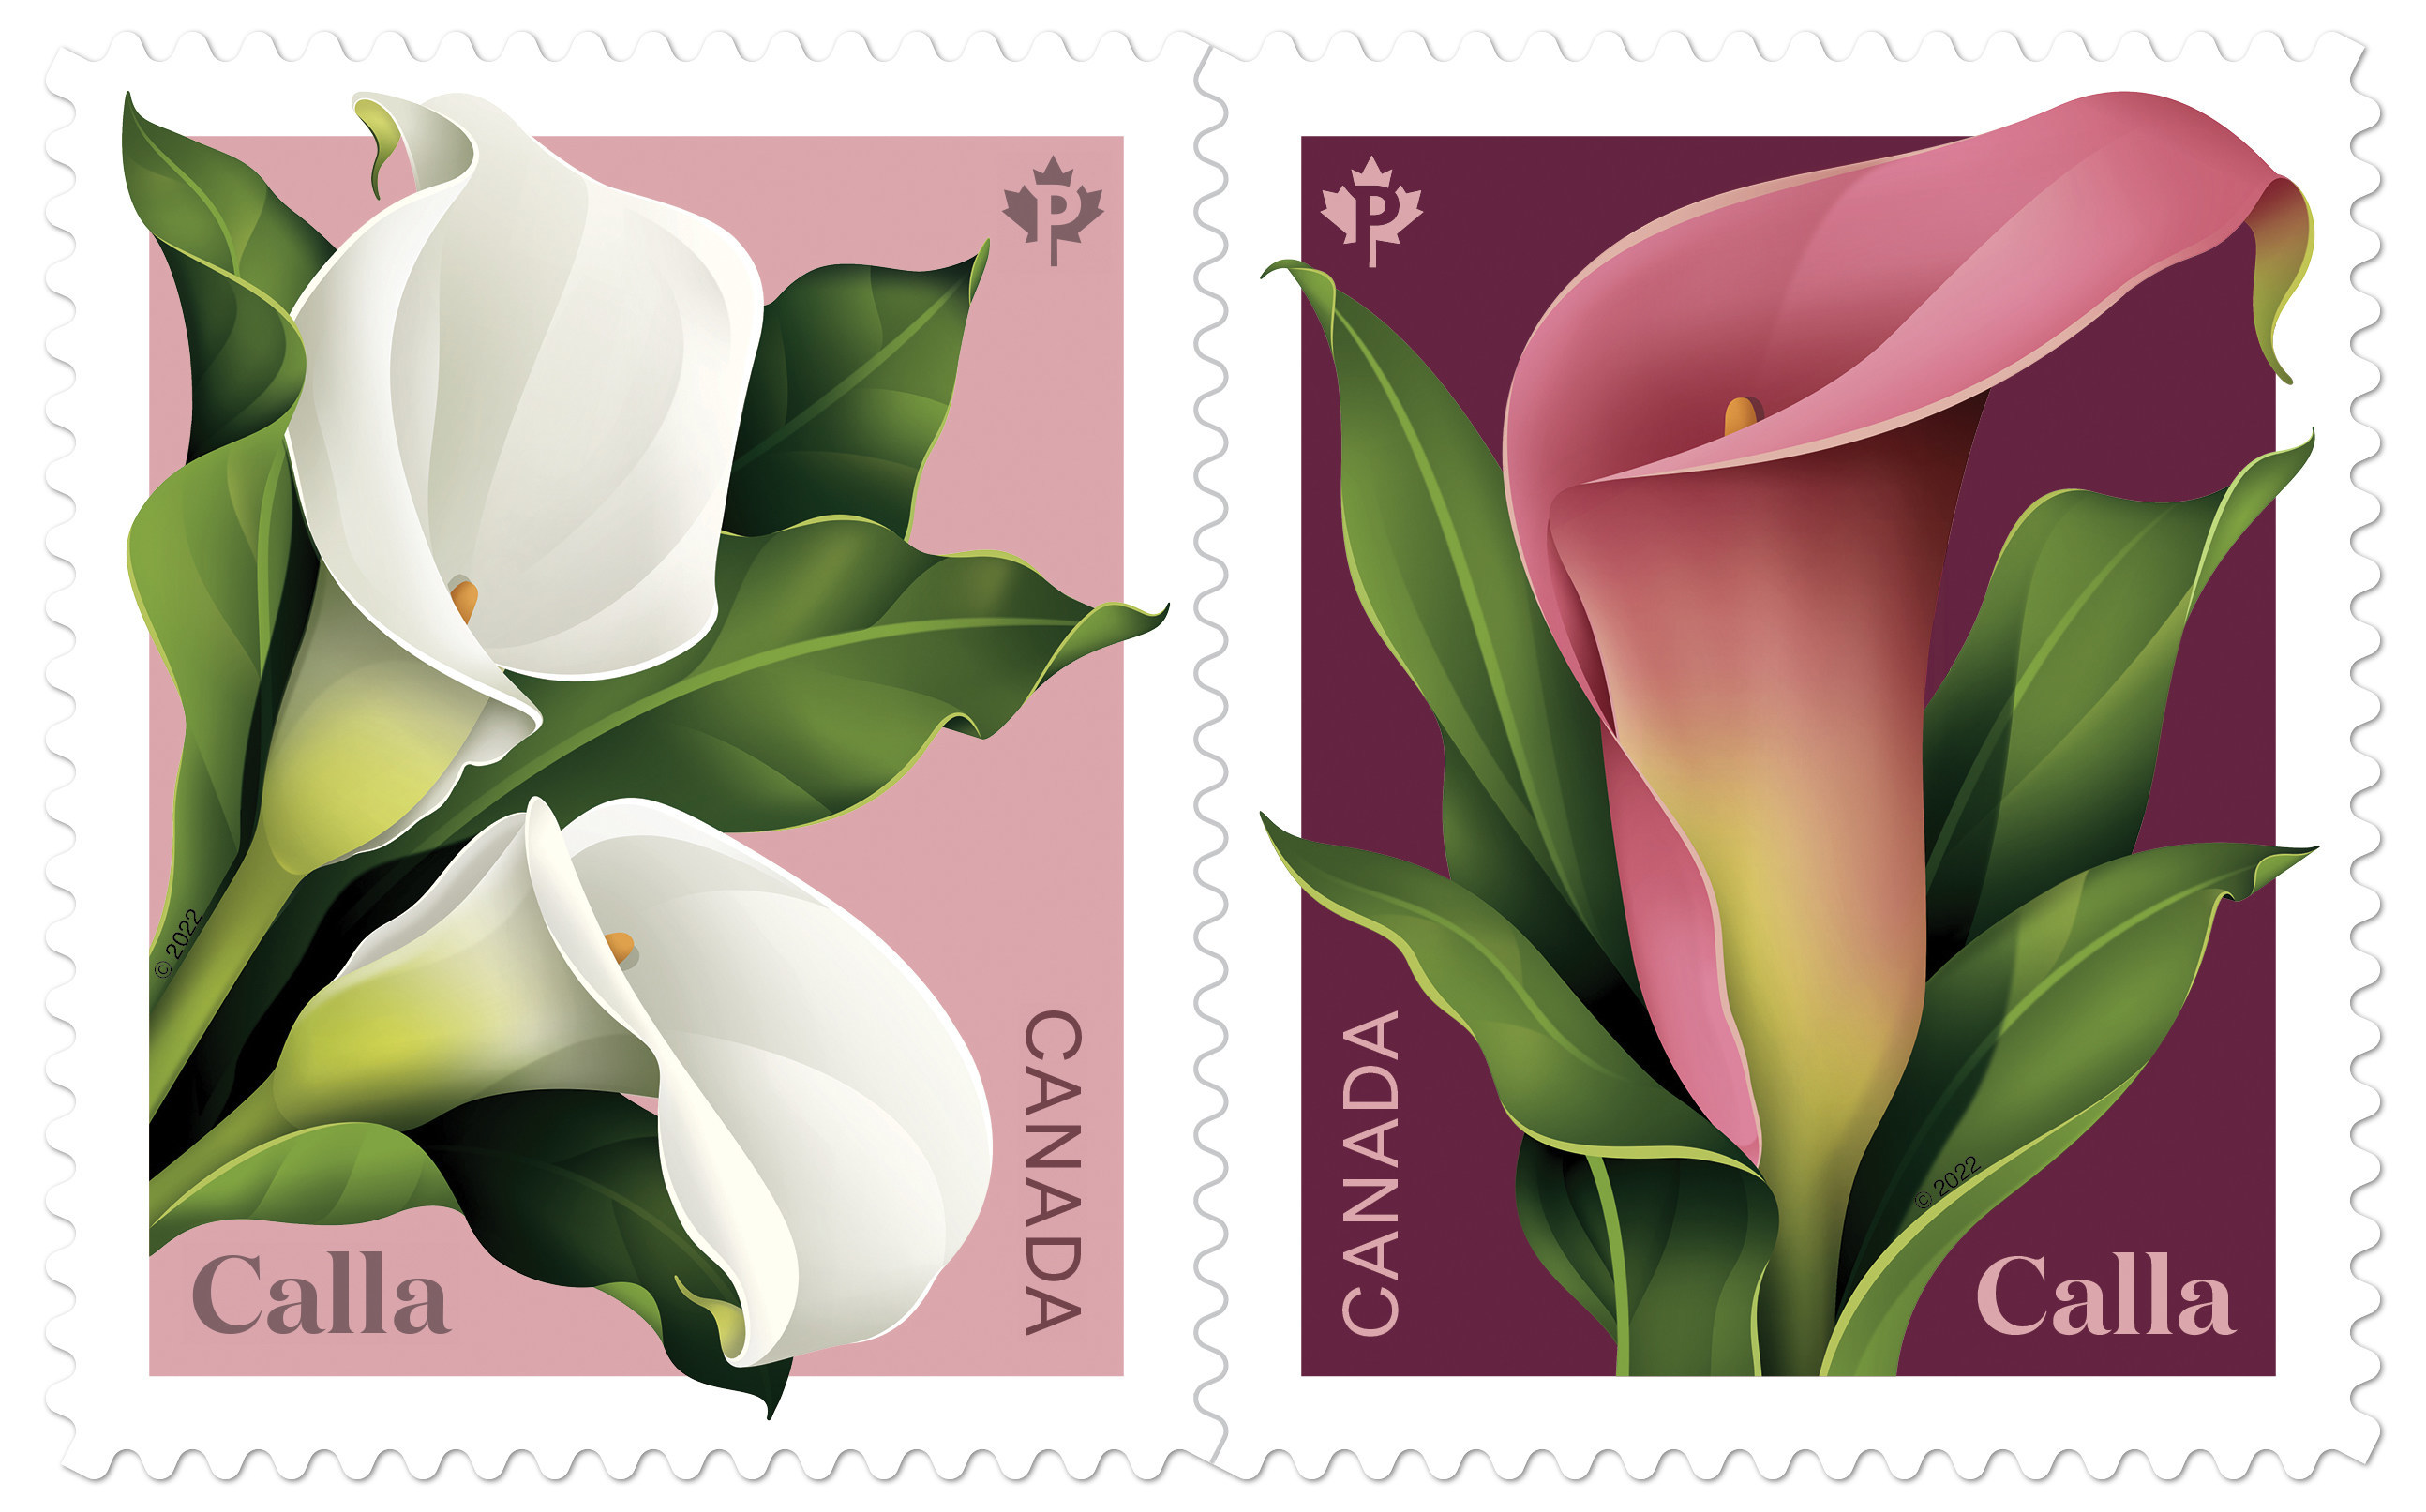 Two stamps, one with a whilte calla and one with a pink calla.